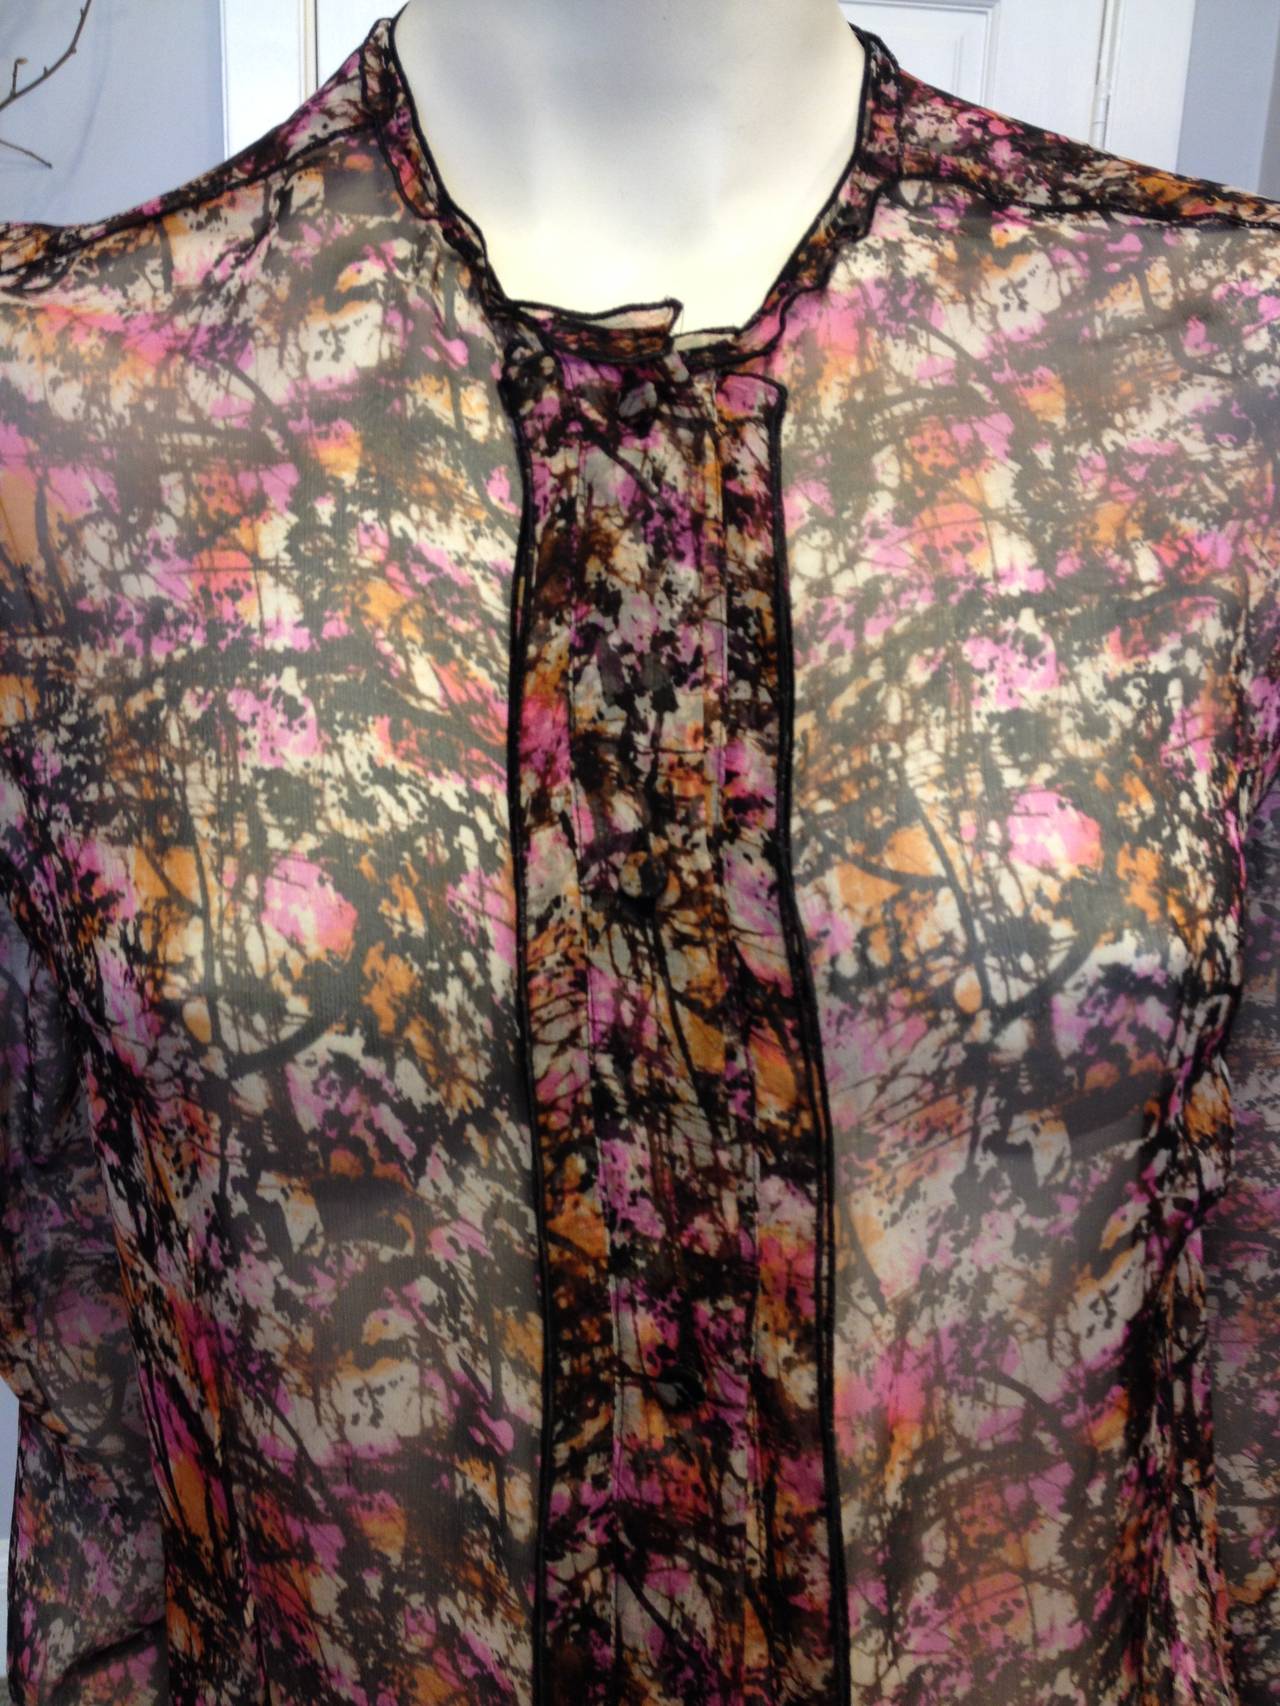 We'll never tire of Bottega Veneta and their timelessly elegant luxury. This blouse features an intricate and beautiful print of tangerine orange, bright magenta purple, and deep brownish black dynamically splashed across a white background. The